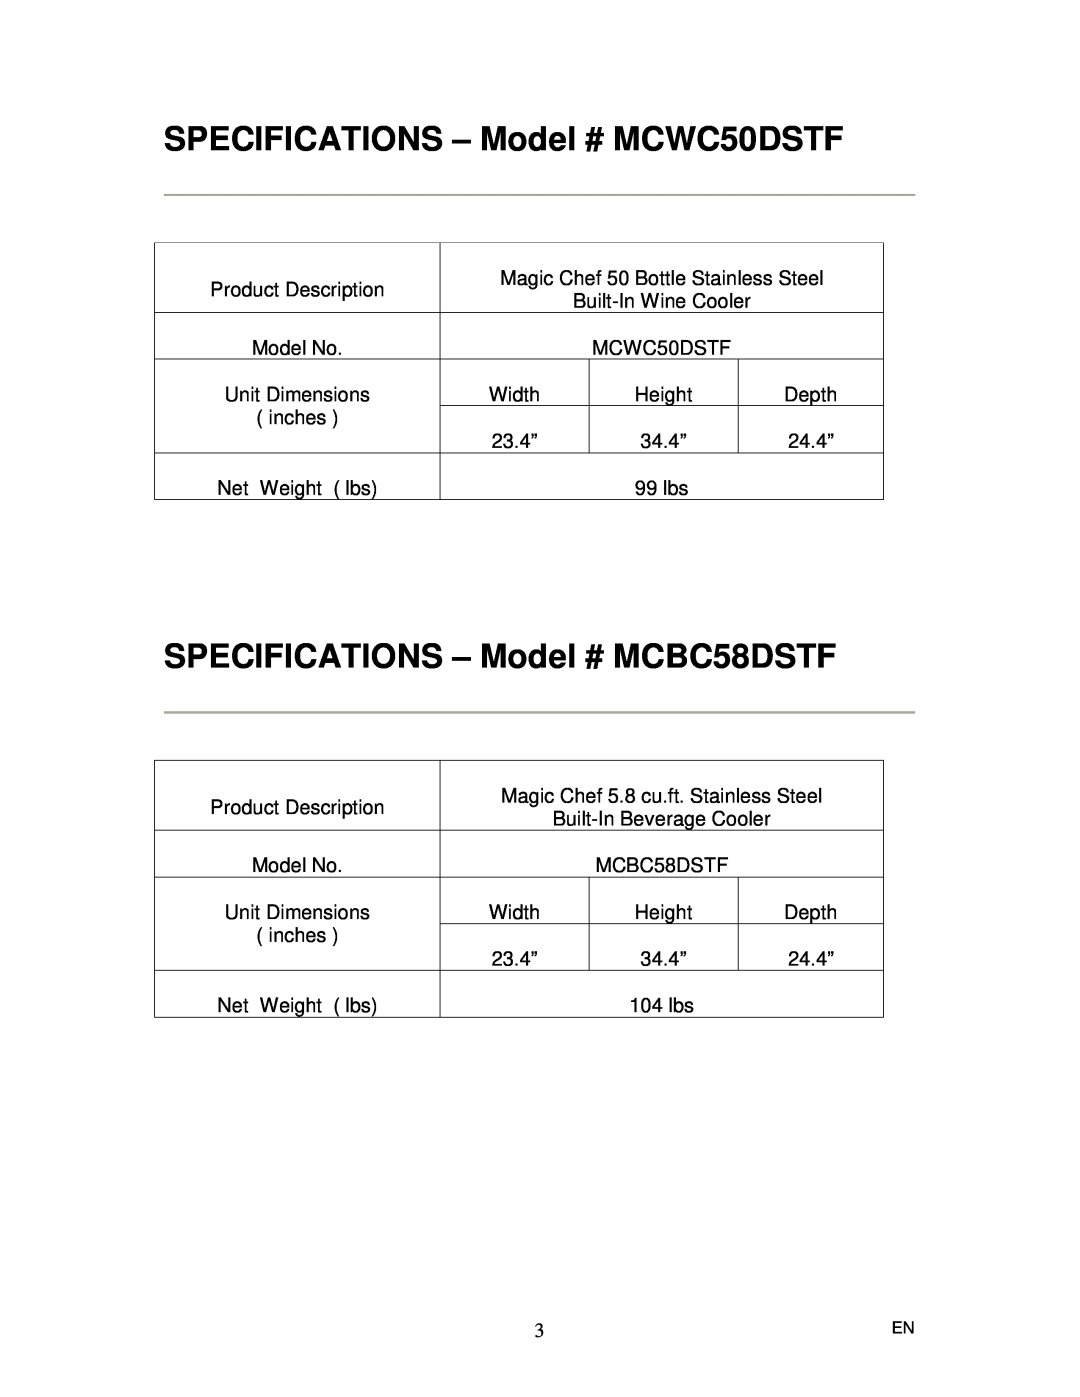 Magic Chef instruction manual SPECIFICATIONS - Model # MCWC50DSTF, SPECIFICATIONS - Model # MCBC58DSTF 